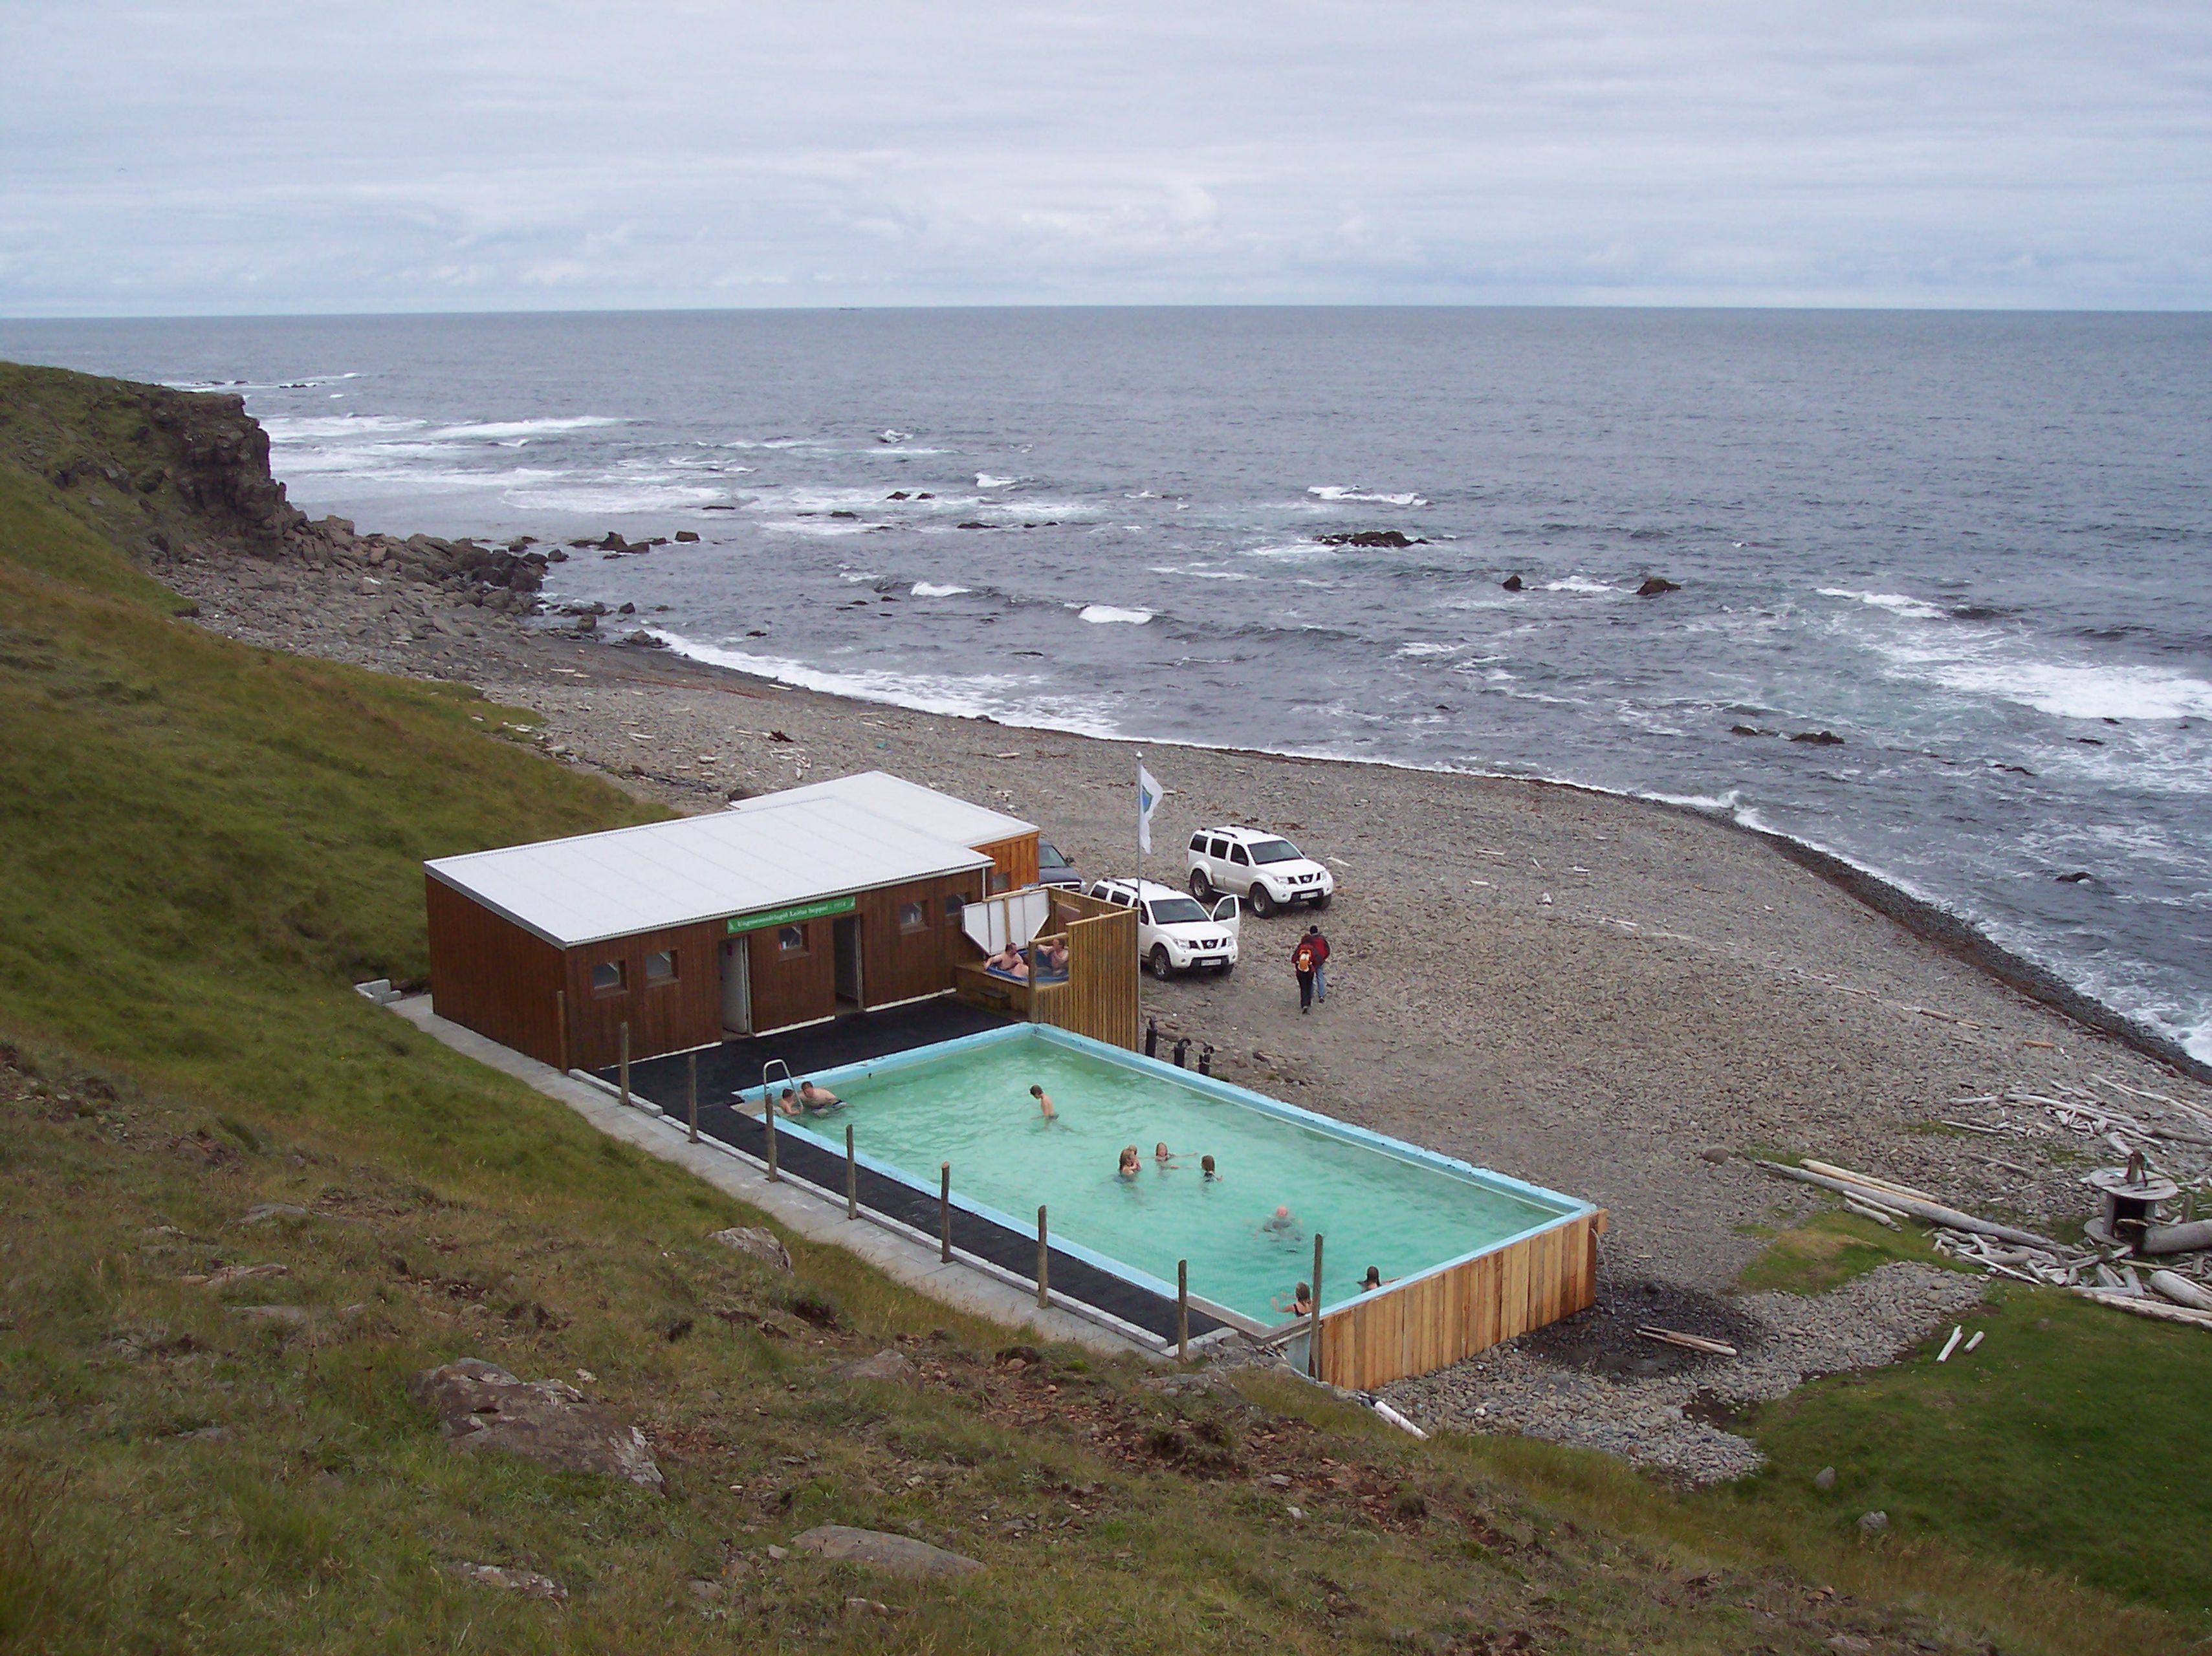 a view from above of Krossneslaug hot spring in iceland, showing changing rooms with showers for the geothermal pool